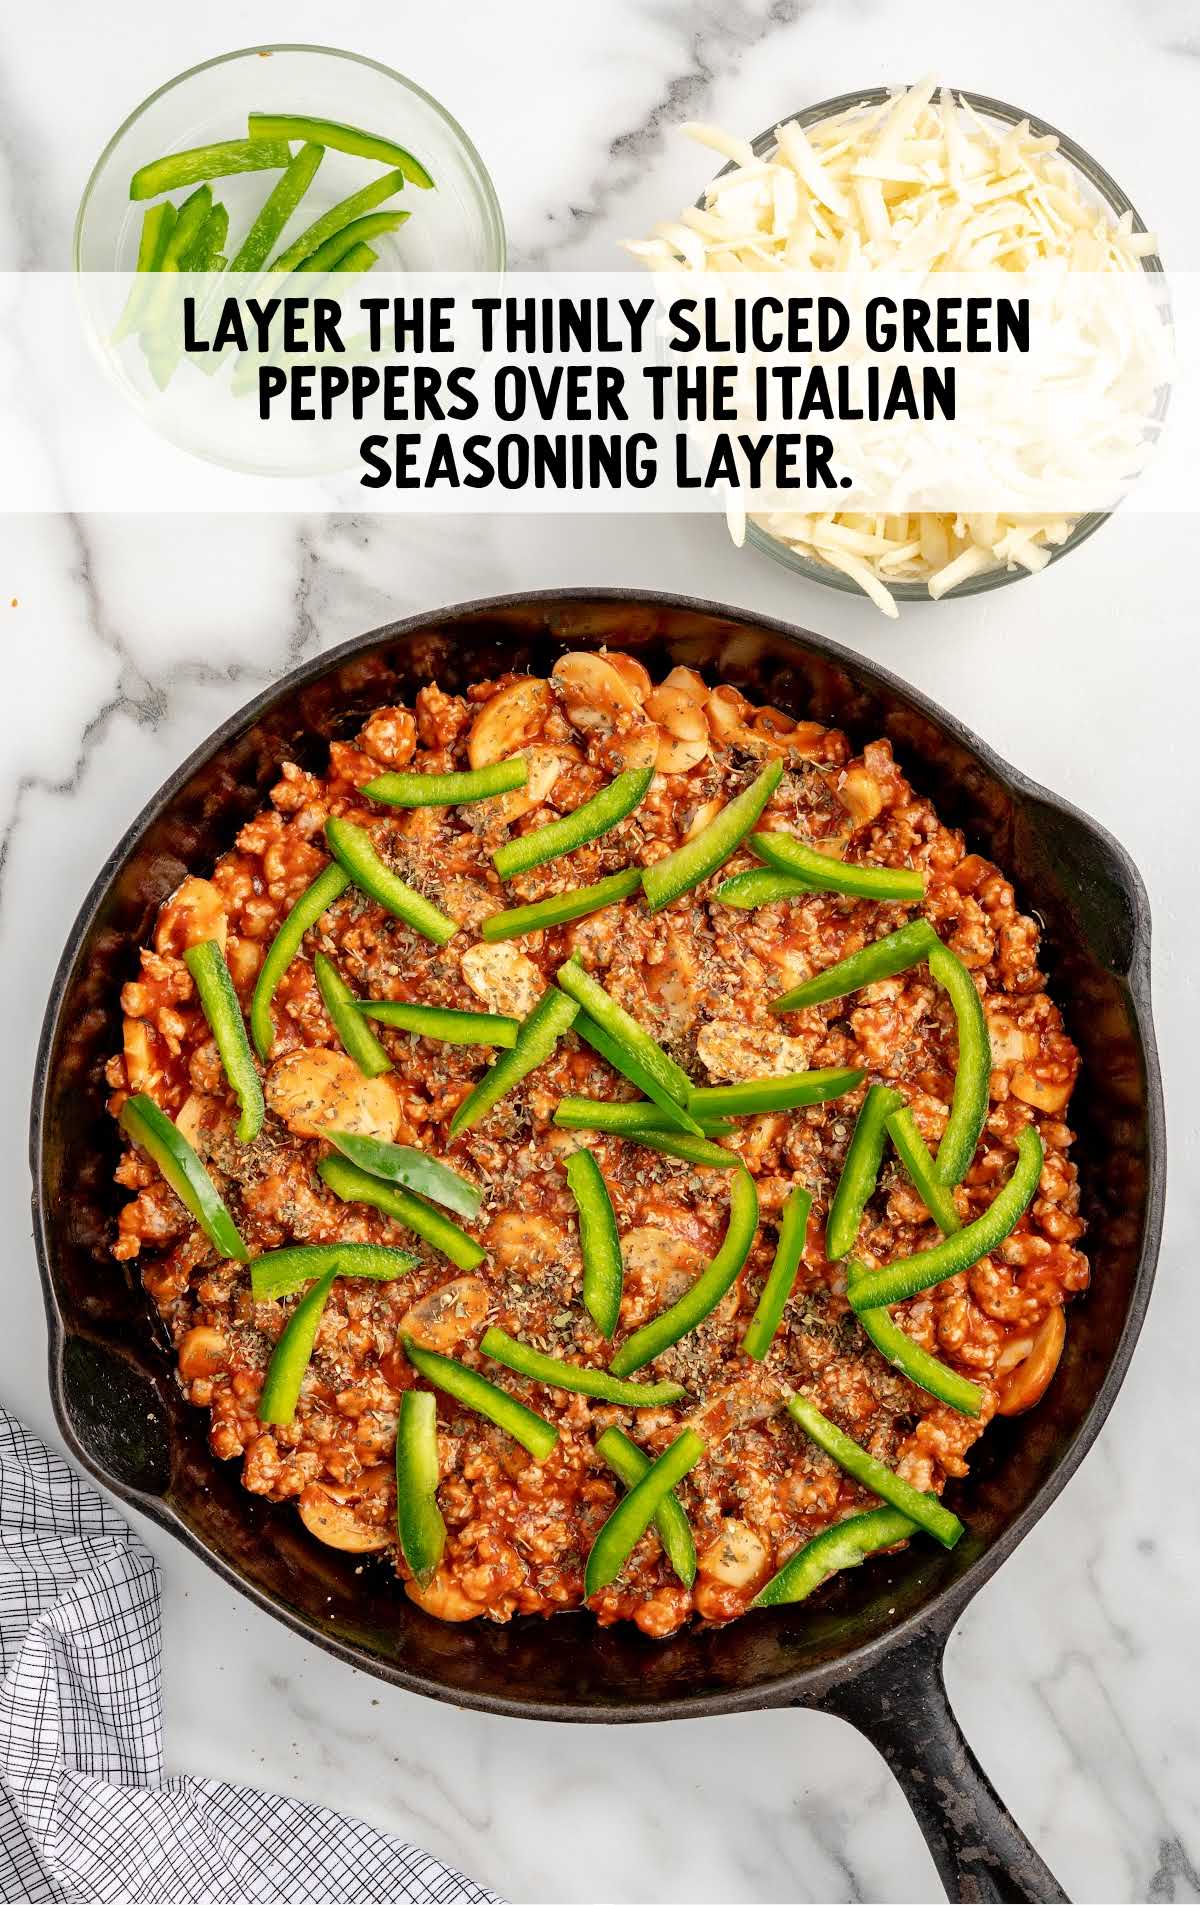 sliced green peppers placed over the Italian seasoning layer in a skillet